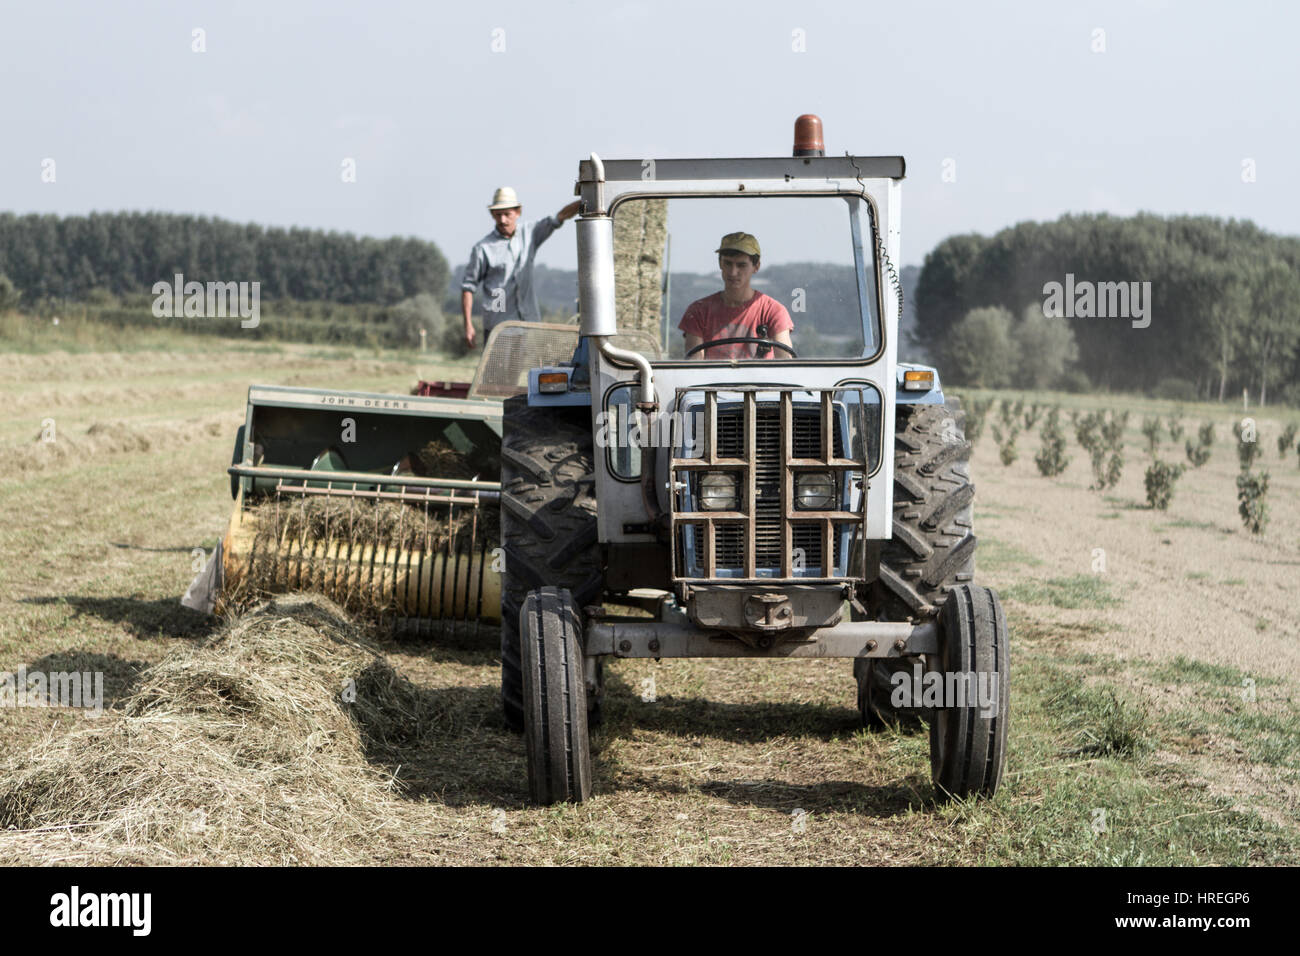 Two men on a tractor harvesting hay in Magliano Alfieri, which is located in the province of Piedmont, Italy. Stock Photo